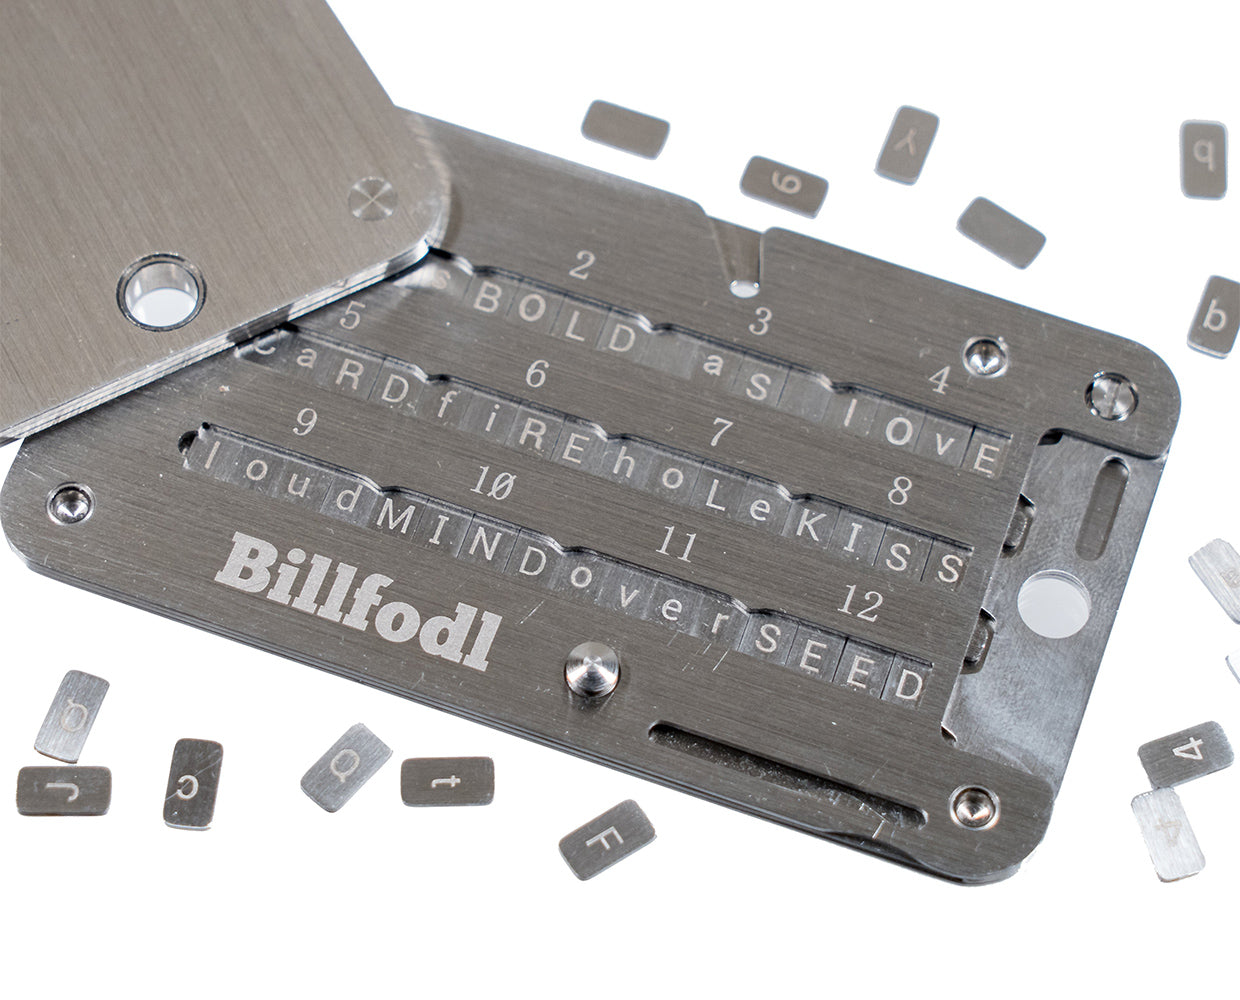 Billfodl Stainless Steel Recovery Seed Backup Tool